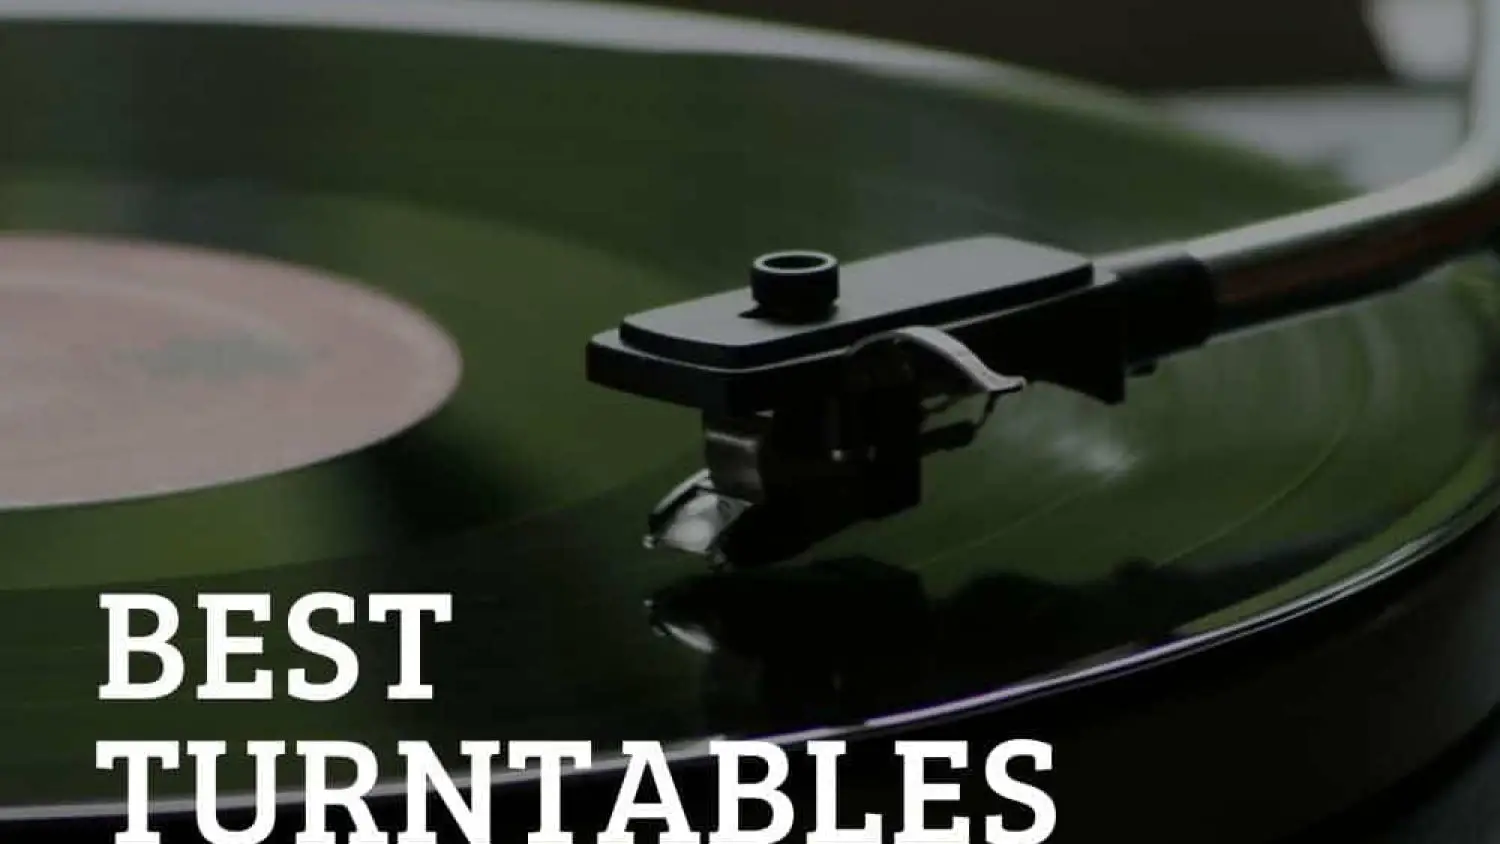 The Best Turntables For Under £100